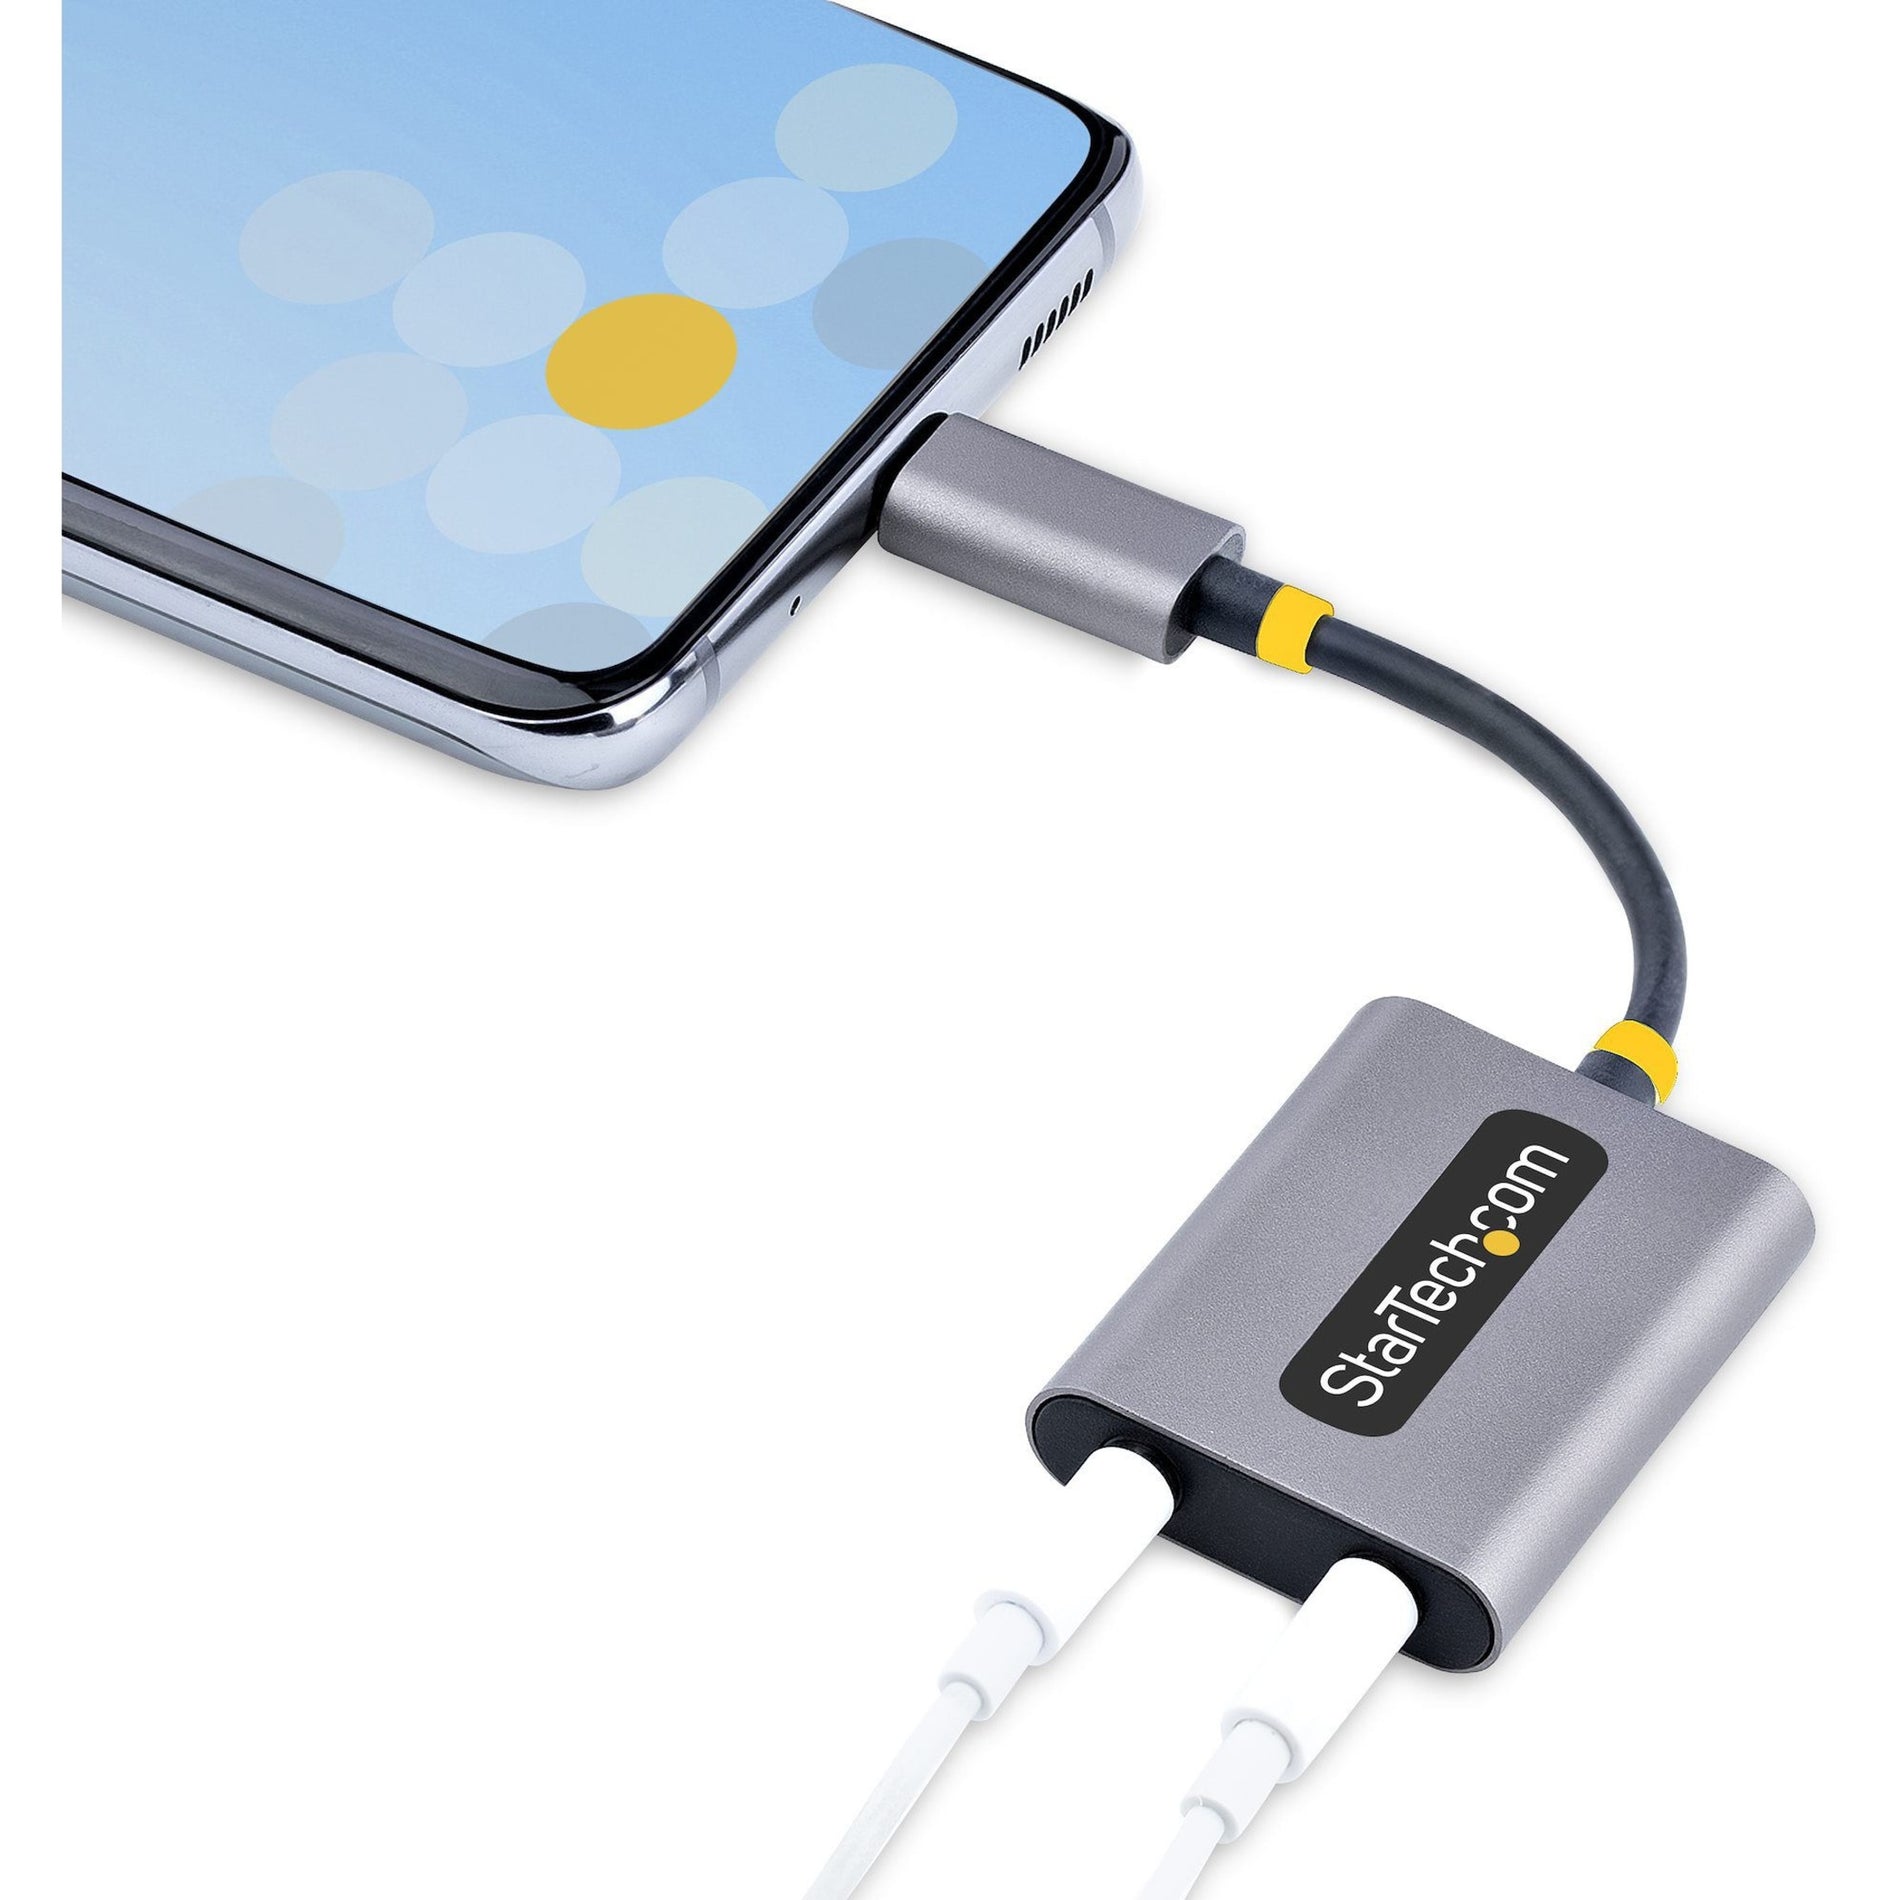 StarTech.com USBC-AUDIO-SPLITTER USB Type-C to 2x 3.5mm Audio Adapter, USB-C Dual Headset Adapter with Mic Input, USB C to 3.5mm Audio Adapter/Earphone Dongle/Aux Jack